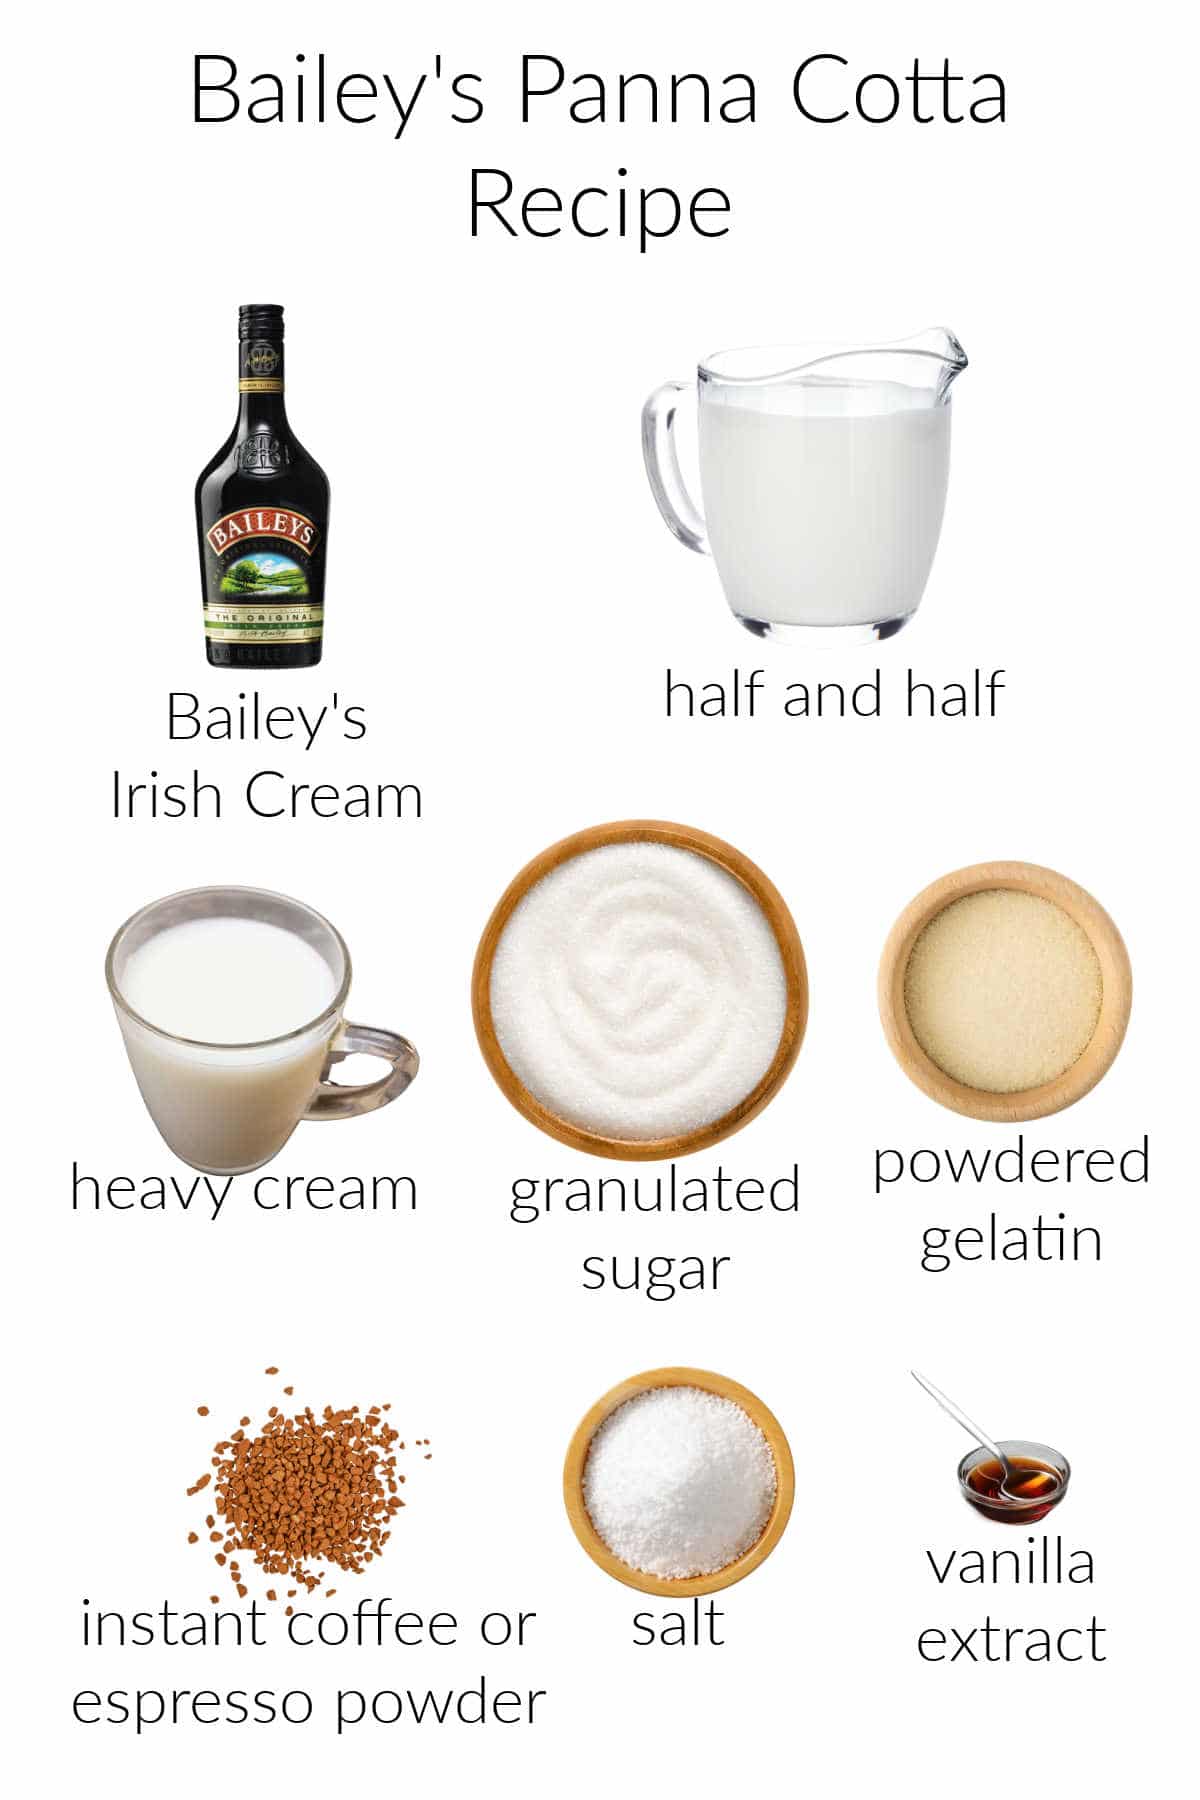 A collage of ingredients for making Irish cream panna cotta including: Irish Cream, half and half in a glass pitcher, a glass mug of heavy cream, a wooden bowl of white sugar, a wmall wooden bowl of powdered geletin, some instant coffee granules, a small wooden bowl of salt , a small clear glass bowl with vanilla extract and a metal spoon.